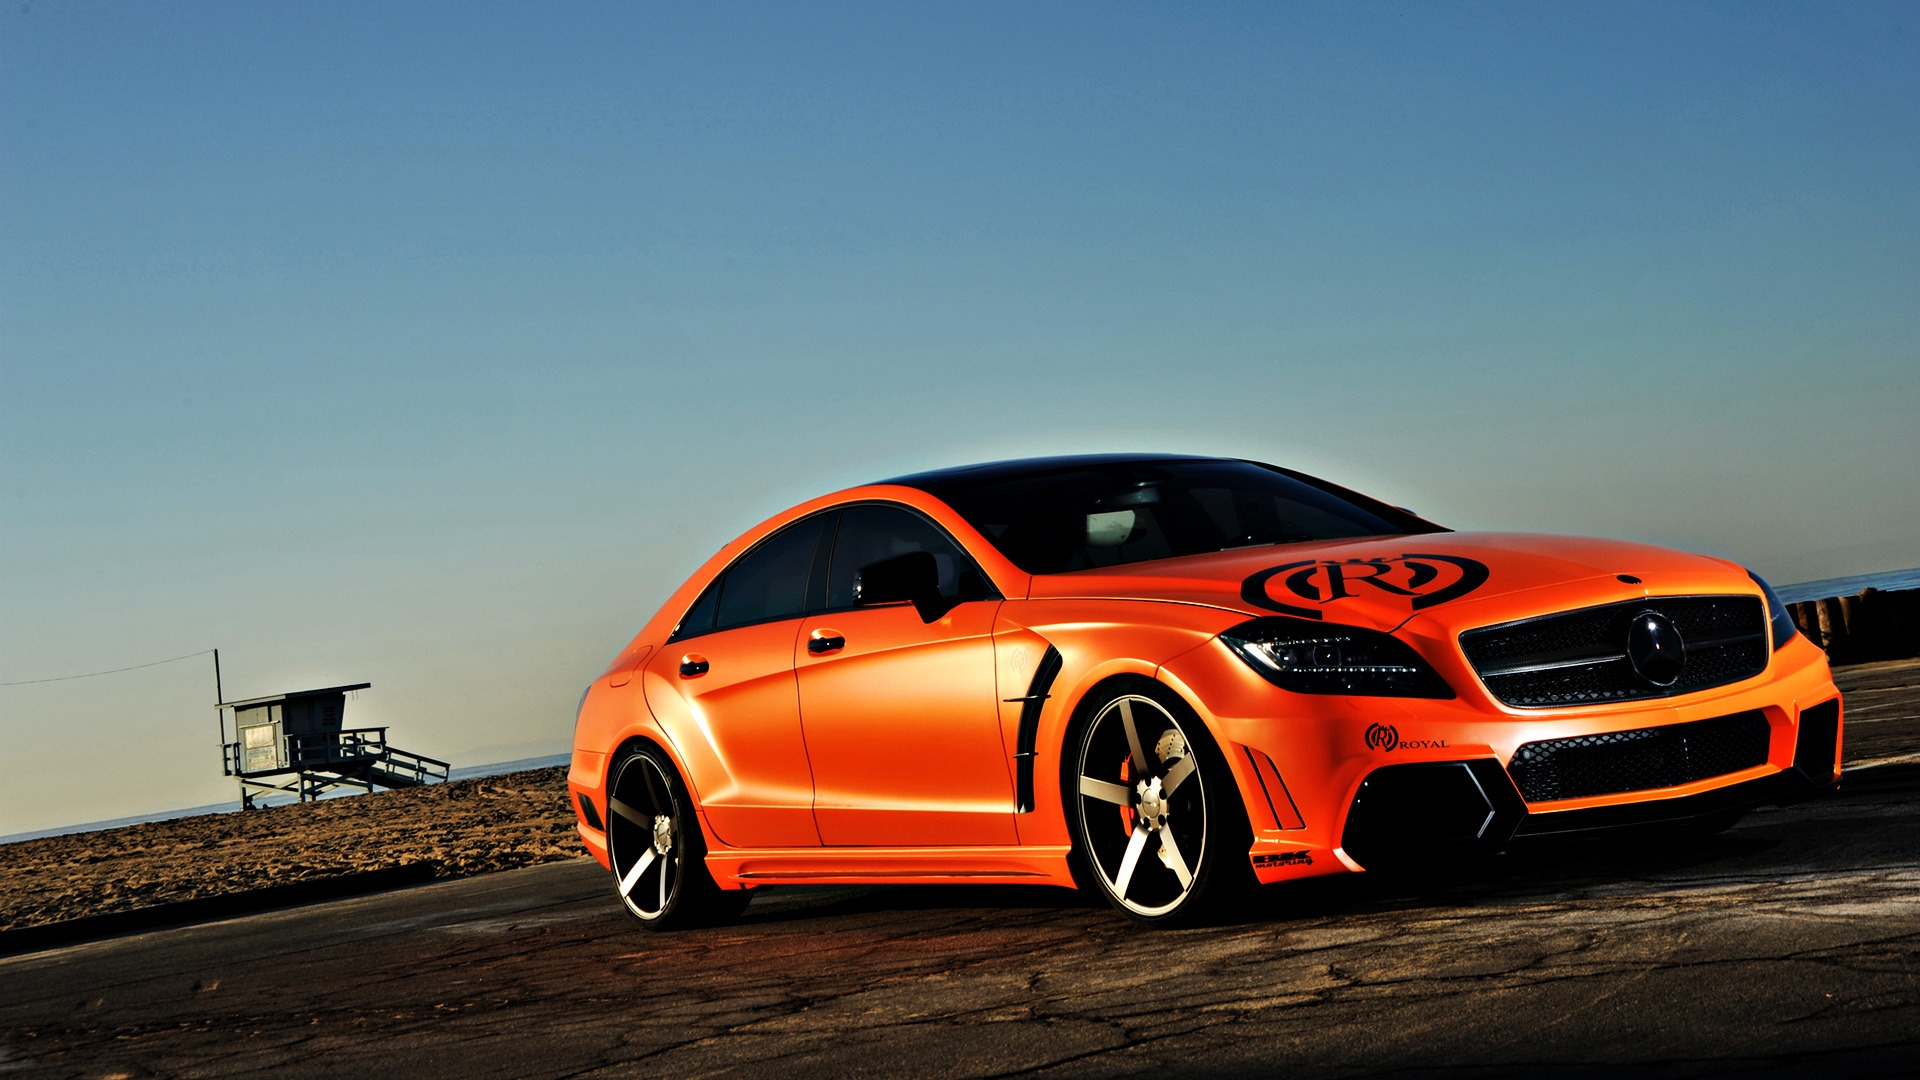 Mercedes CLS 63 AMG Tuning for 1920 x 1080 HDTV 1080p resolution